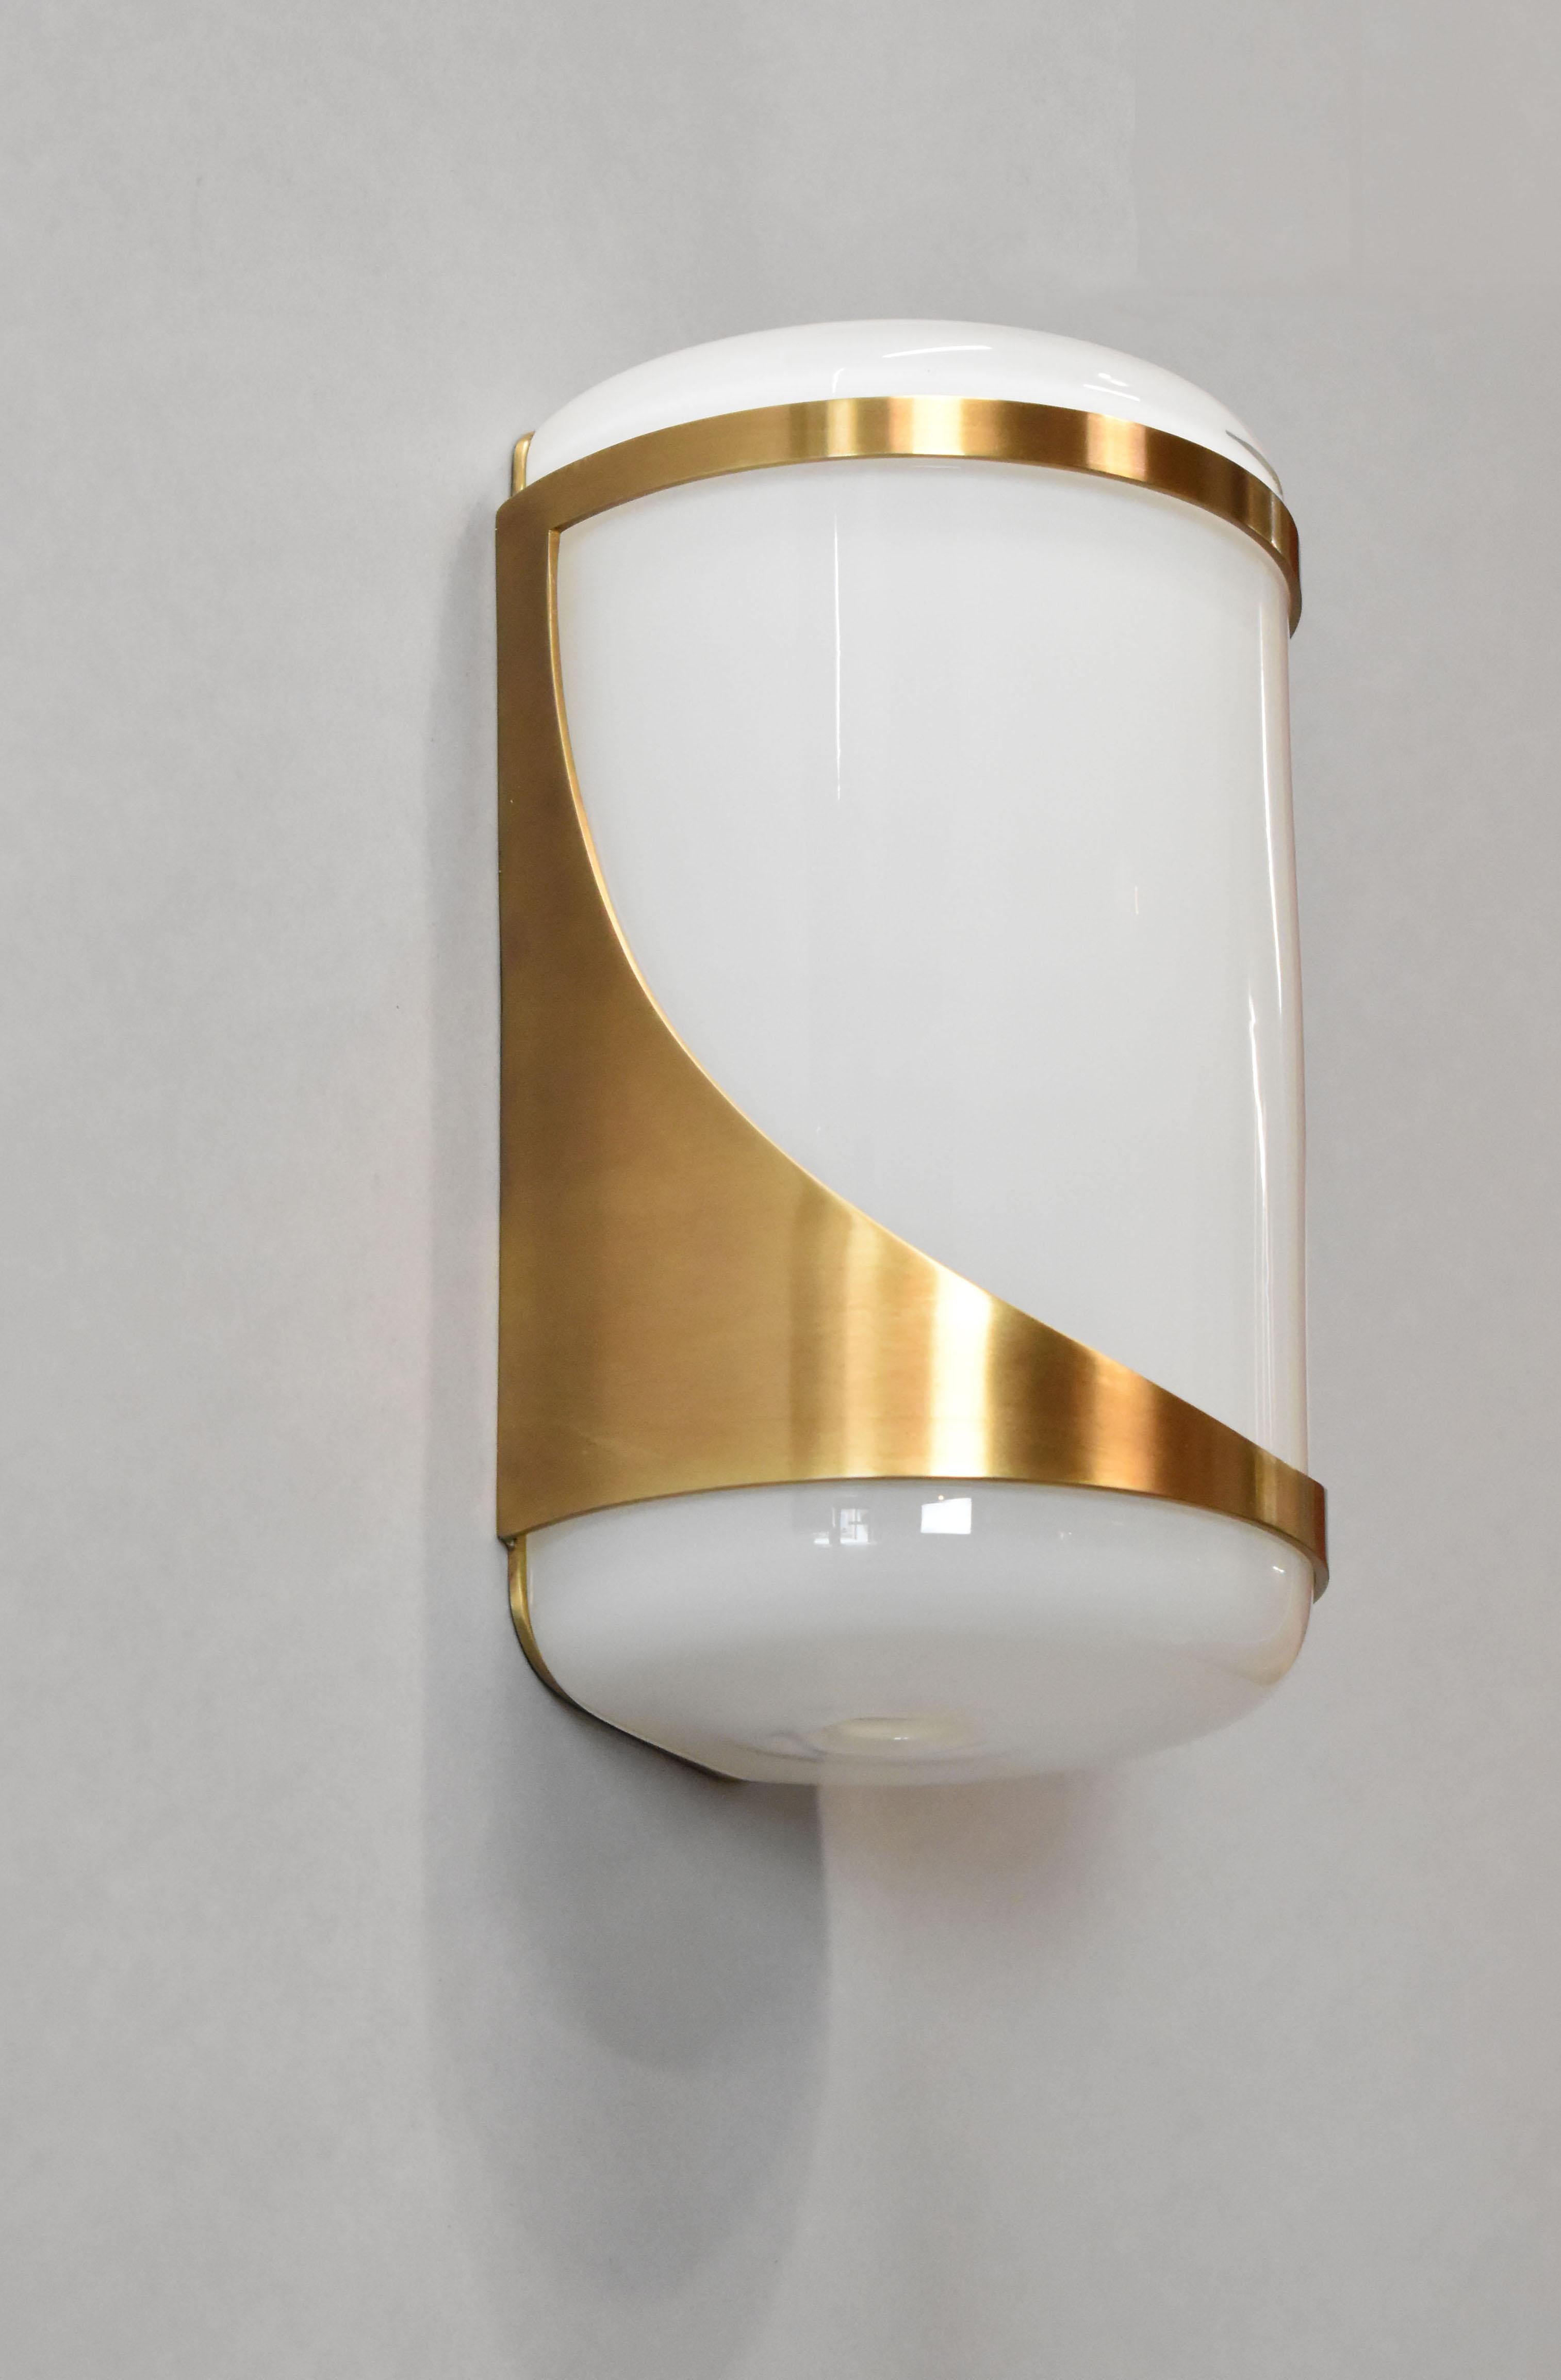 Cargo Wall Light by Atelier Demichelis
Dimensions: W 10 x D 8 x H 20 cm
Materials: Brass, Hand Blown Glass.

Laura Demichelis

Laura was born & brought up in Provence, in the south of France.
Trained at the École Boulle in Paris, she obtained her